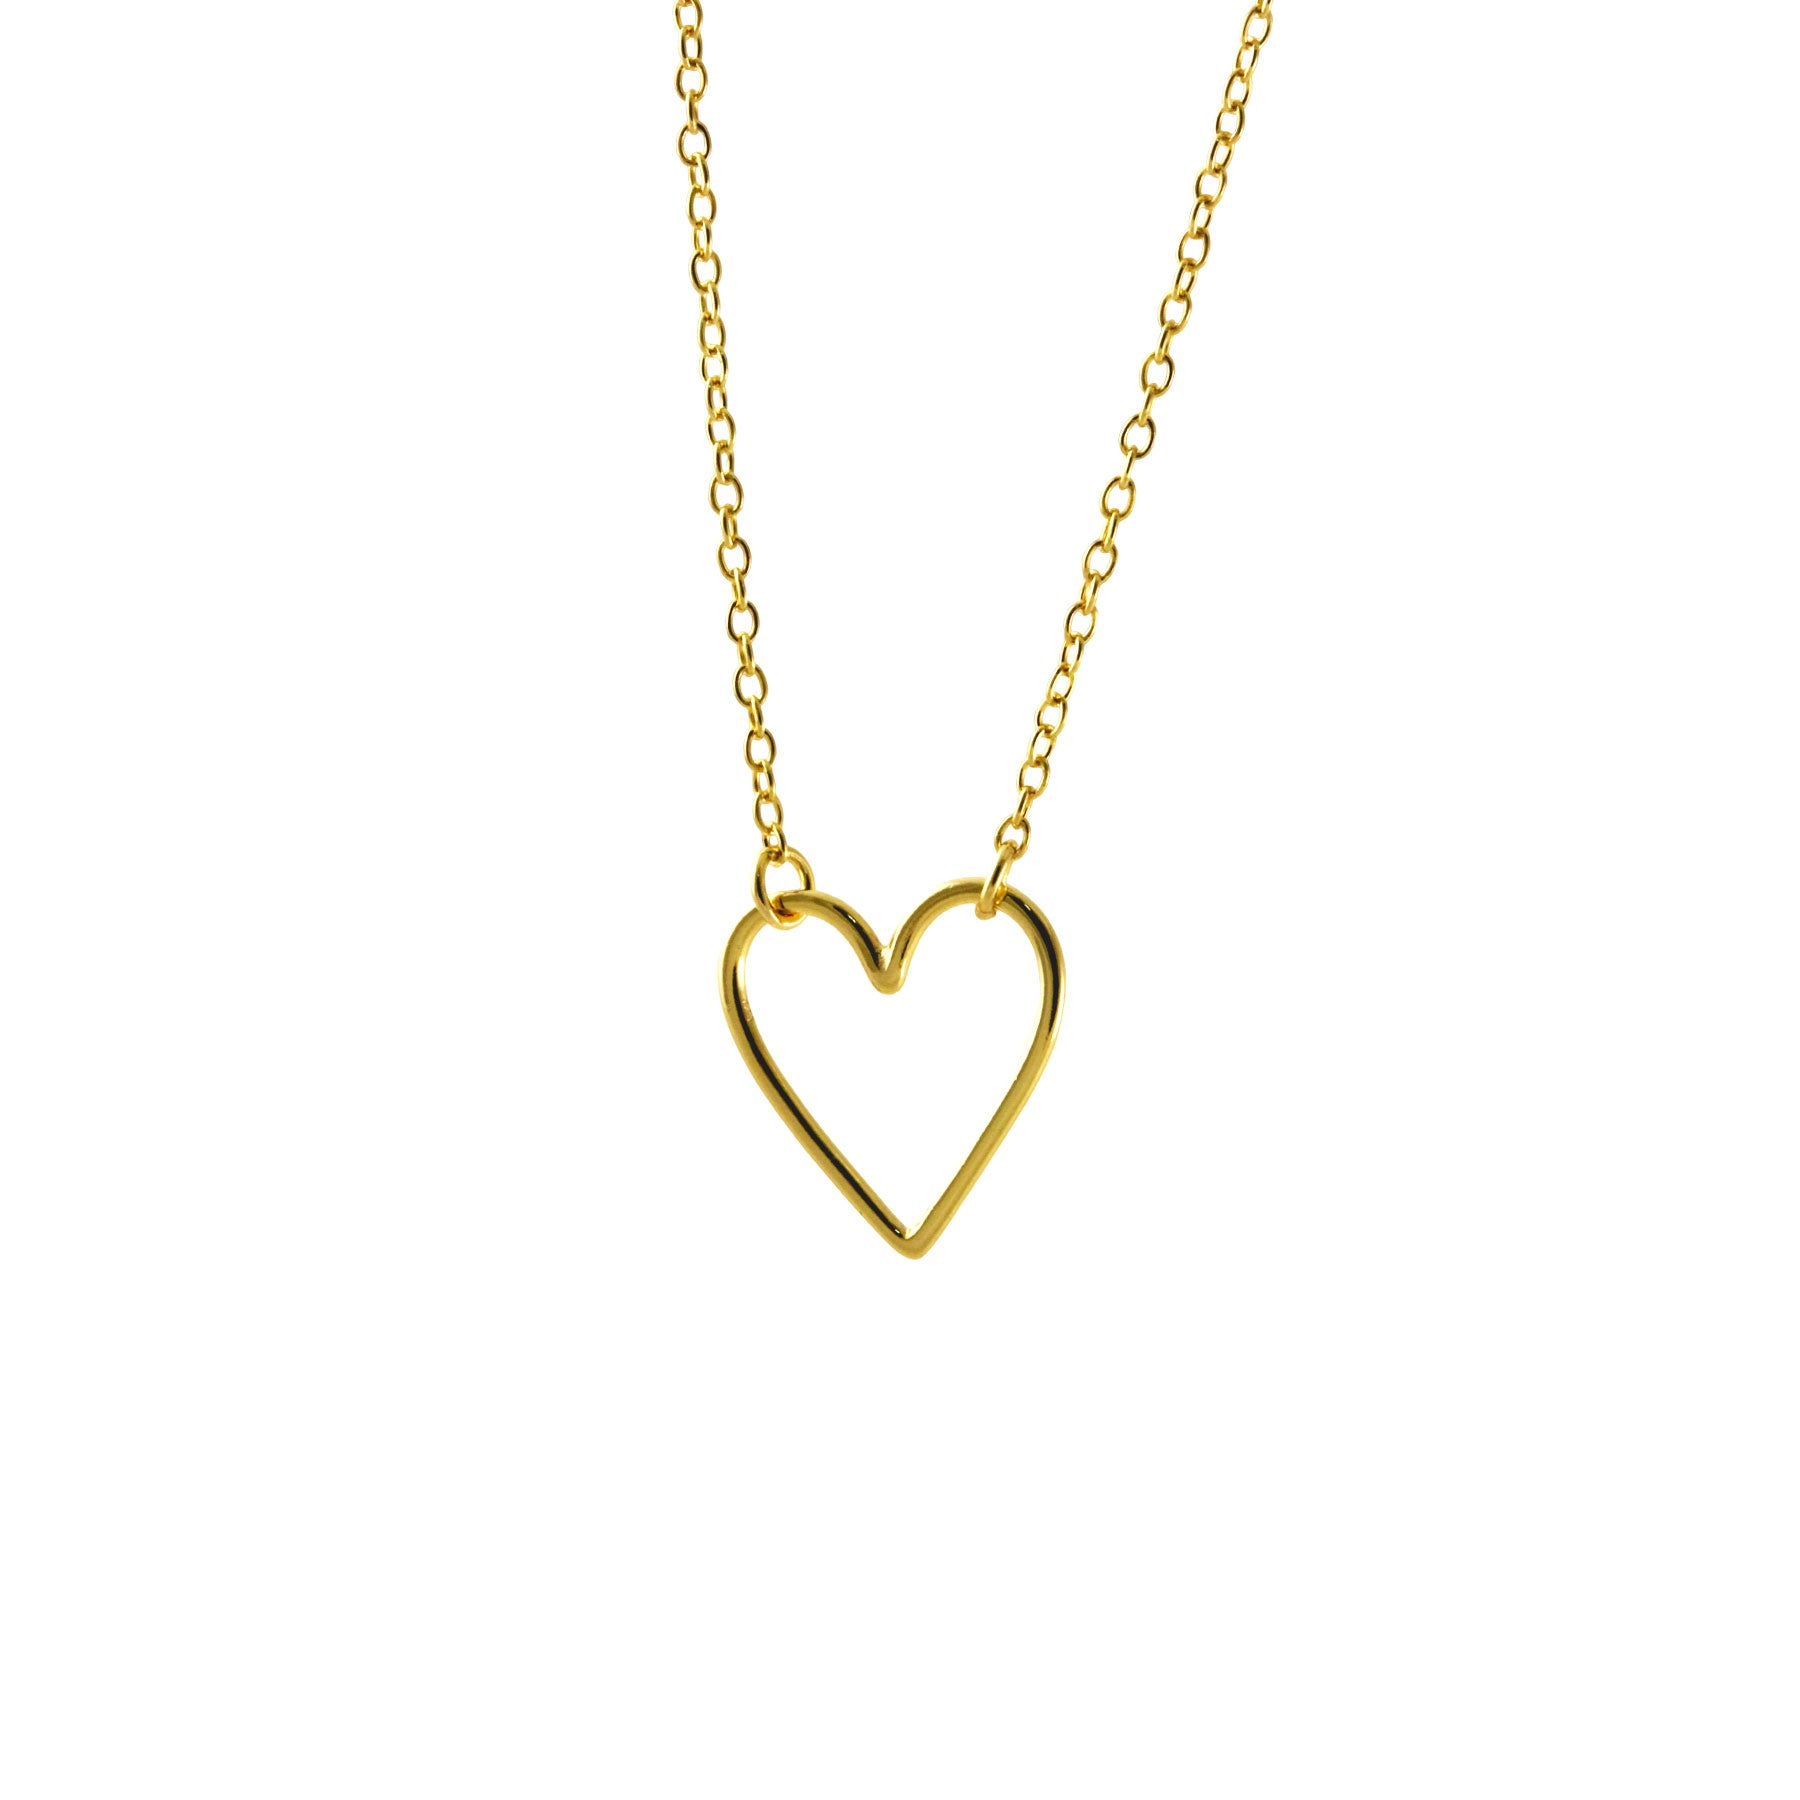 Sterling Floating Heart Pendant Necklace